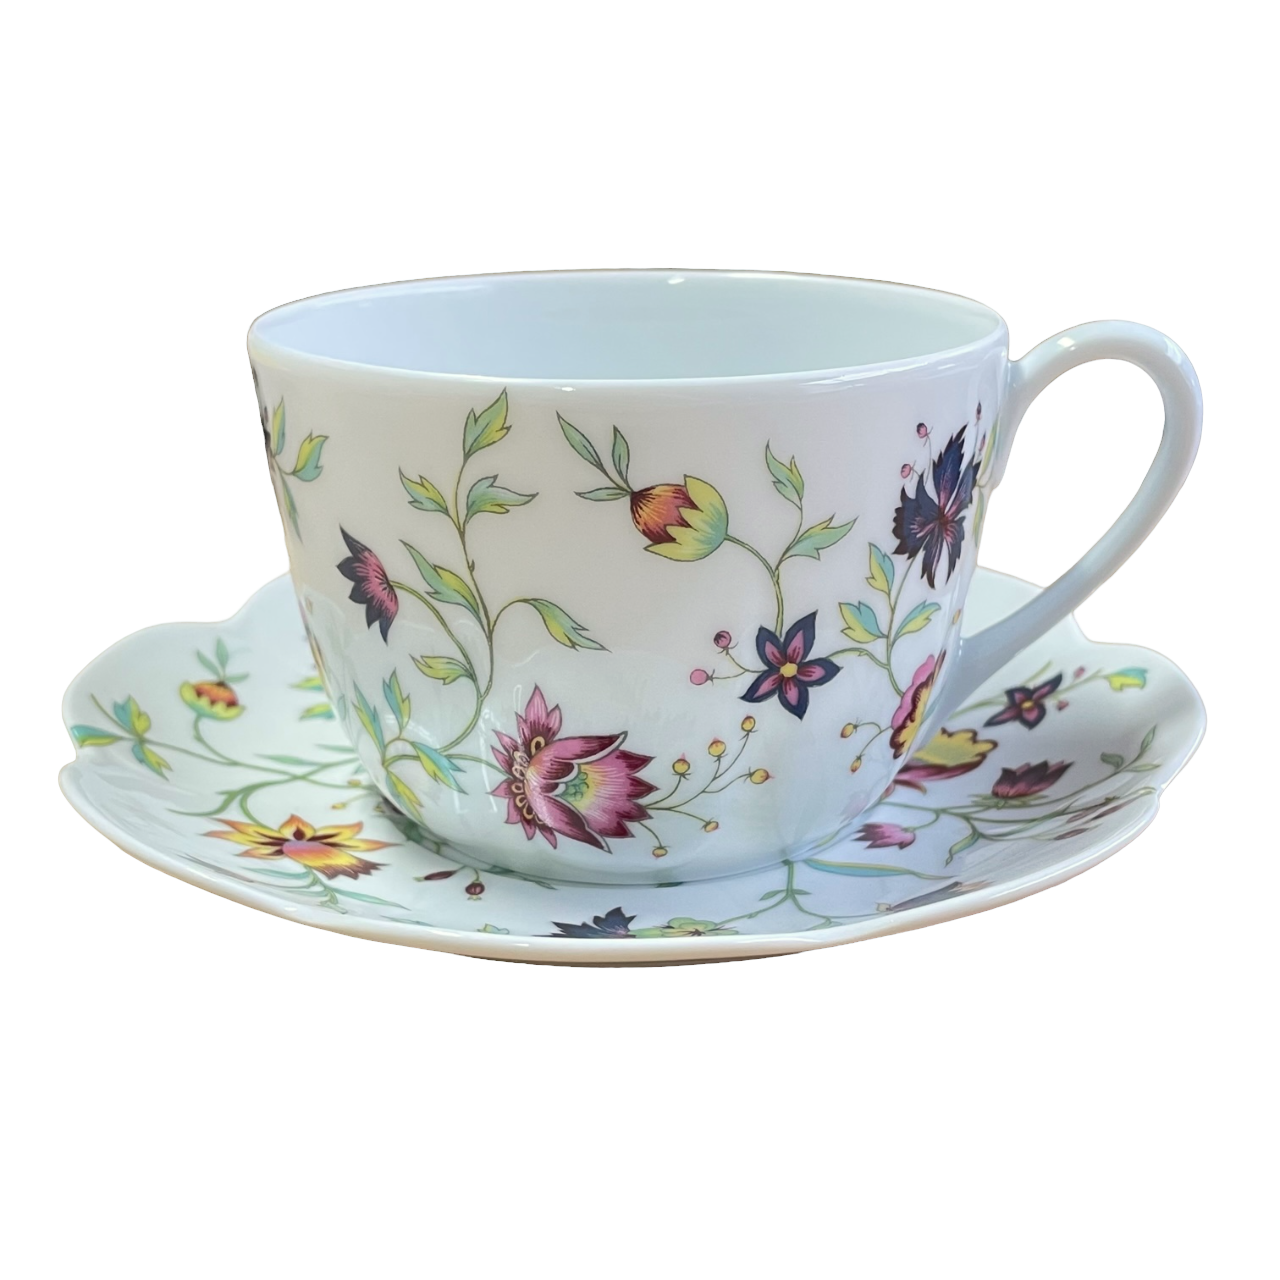 Adriana - Breakfast cup and saucer 15.83 oz